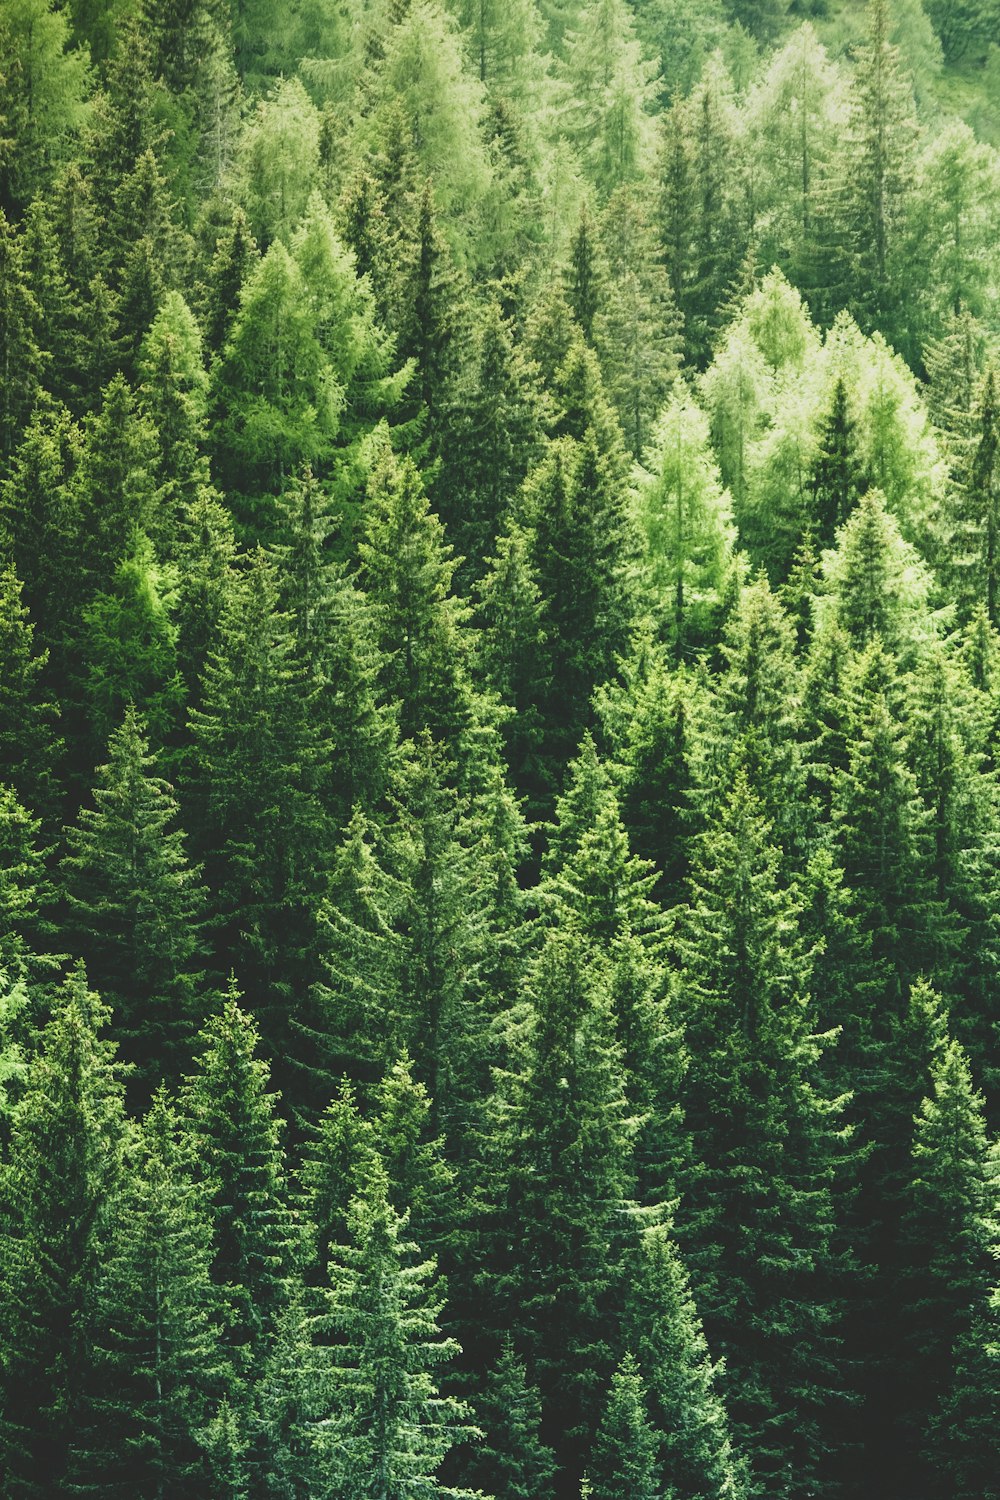 Green pine trees in forrest photo – Free Backgrounds Image on Unsplash